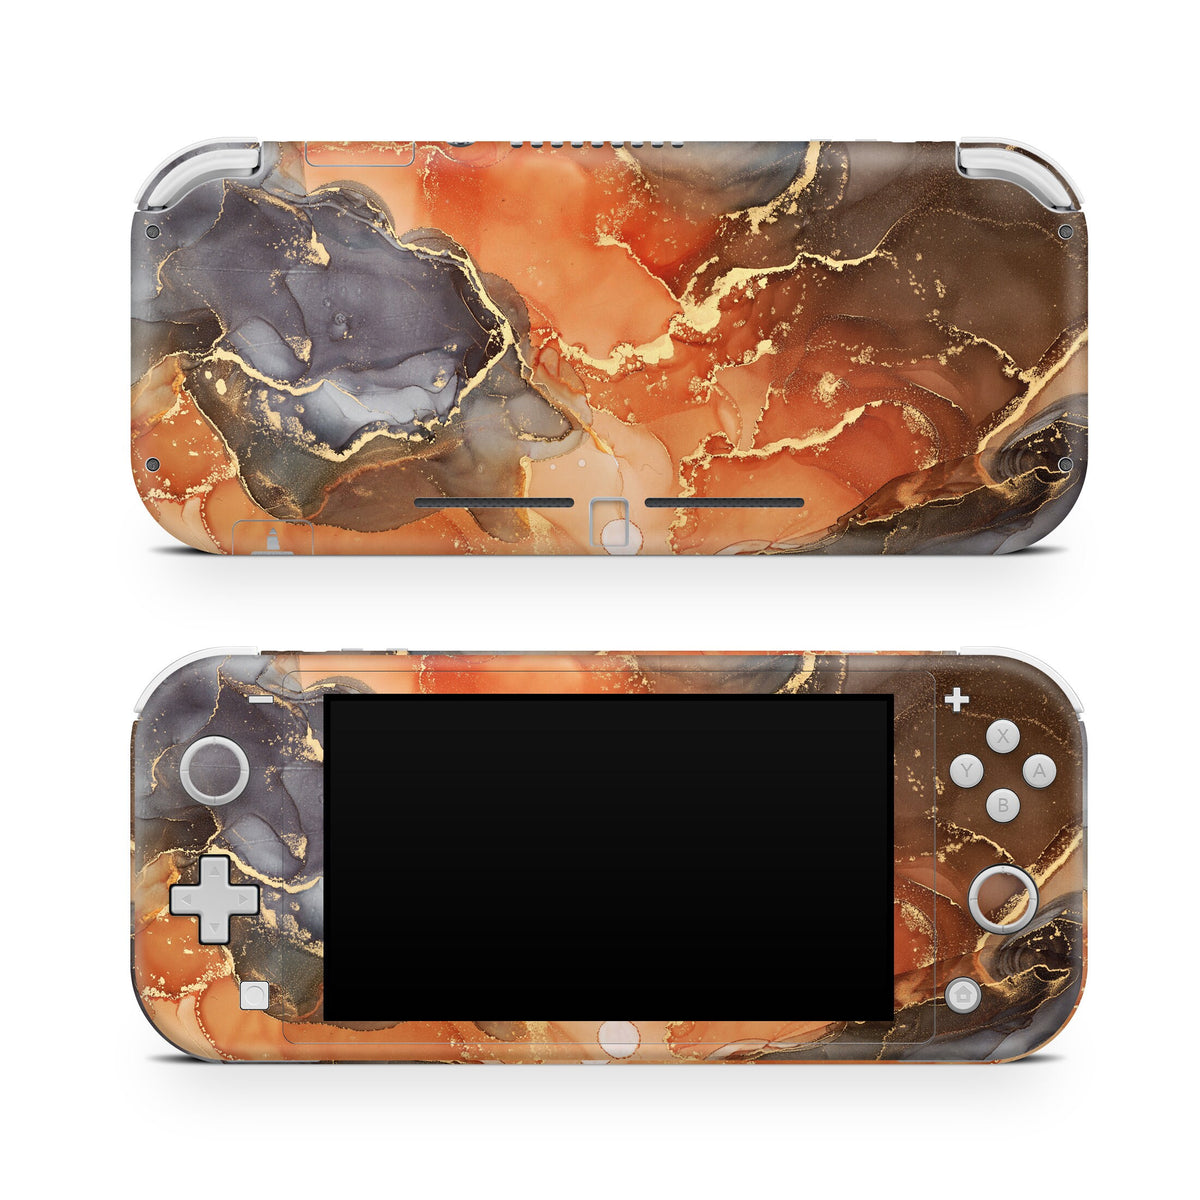 Nintendo switch Lite skin marbel, Abstract switches lite skin Full cover 3m